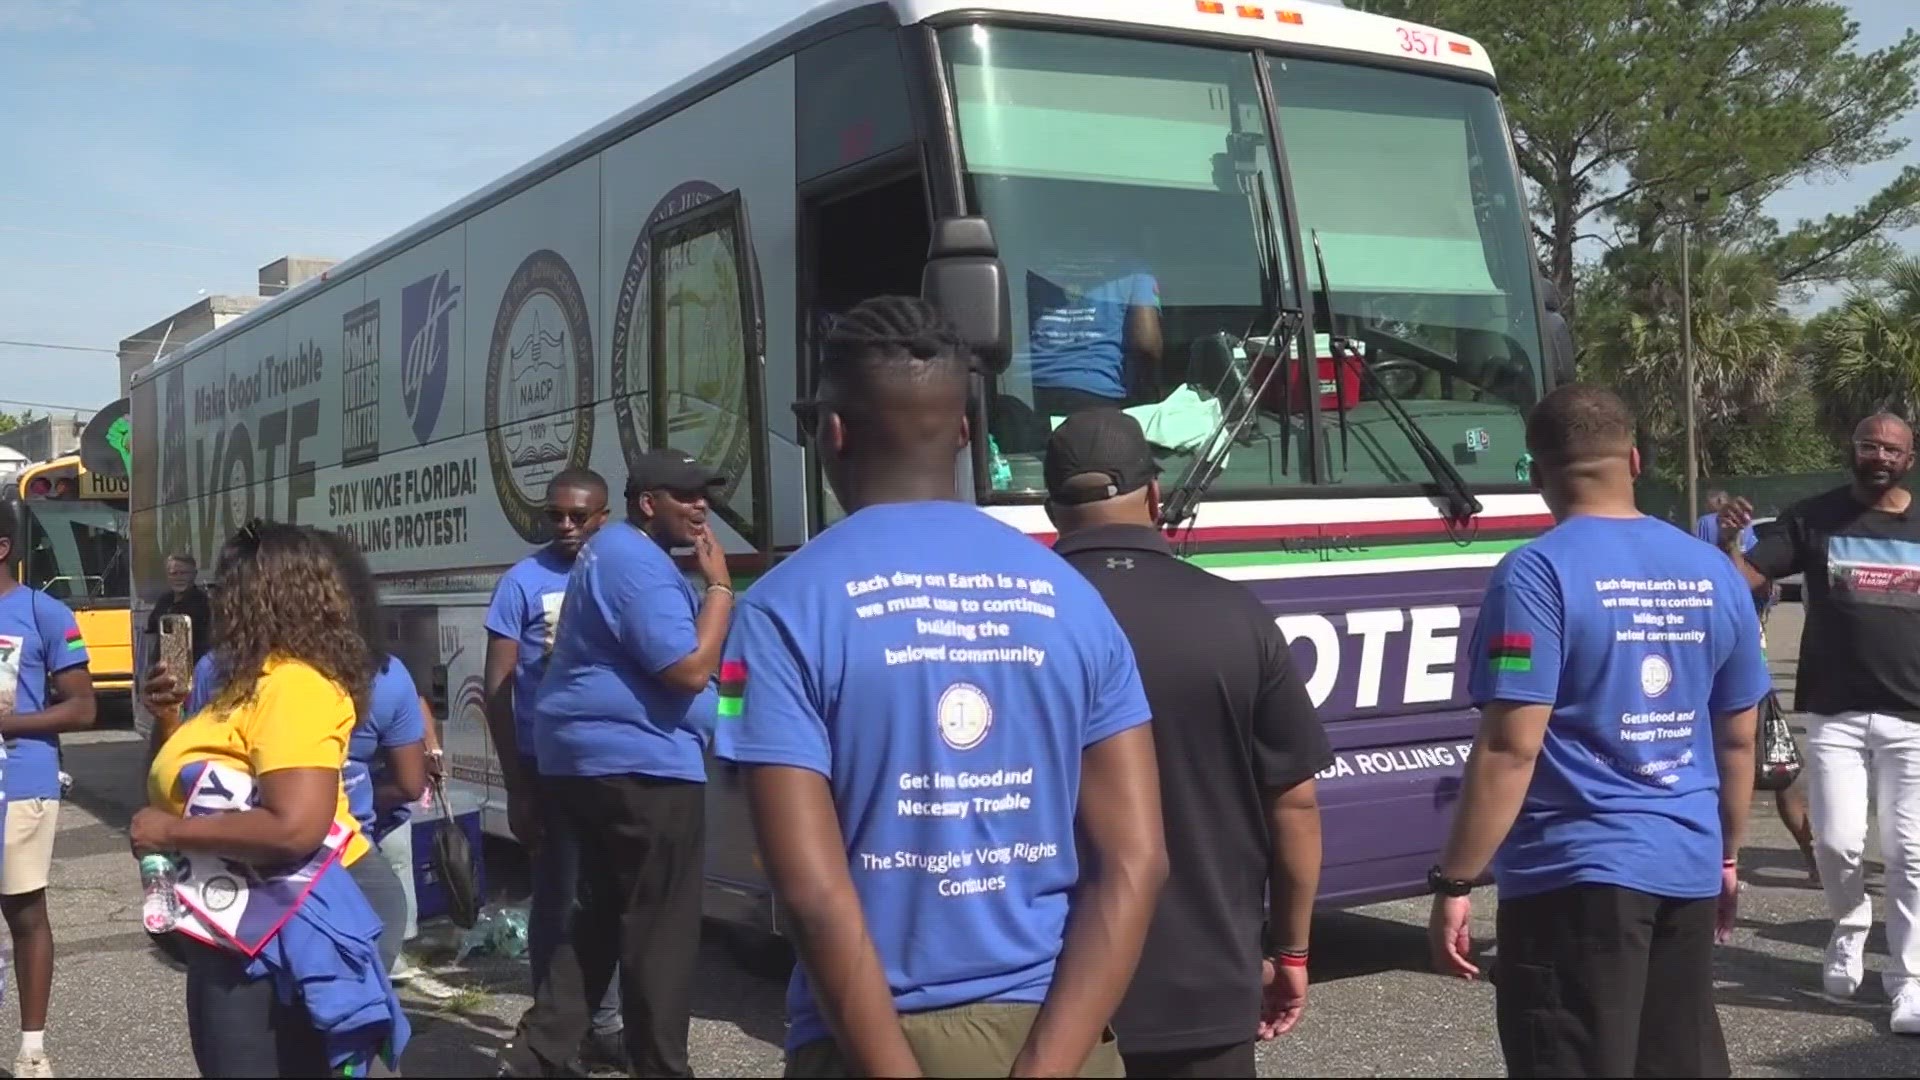 Nearly 30 members from the Transformative Justice Coalition loaded the ‘John Lewis make trouble good bus’ at the kickoff event.